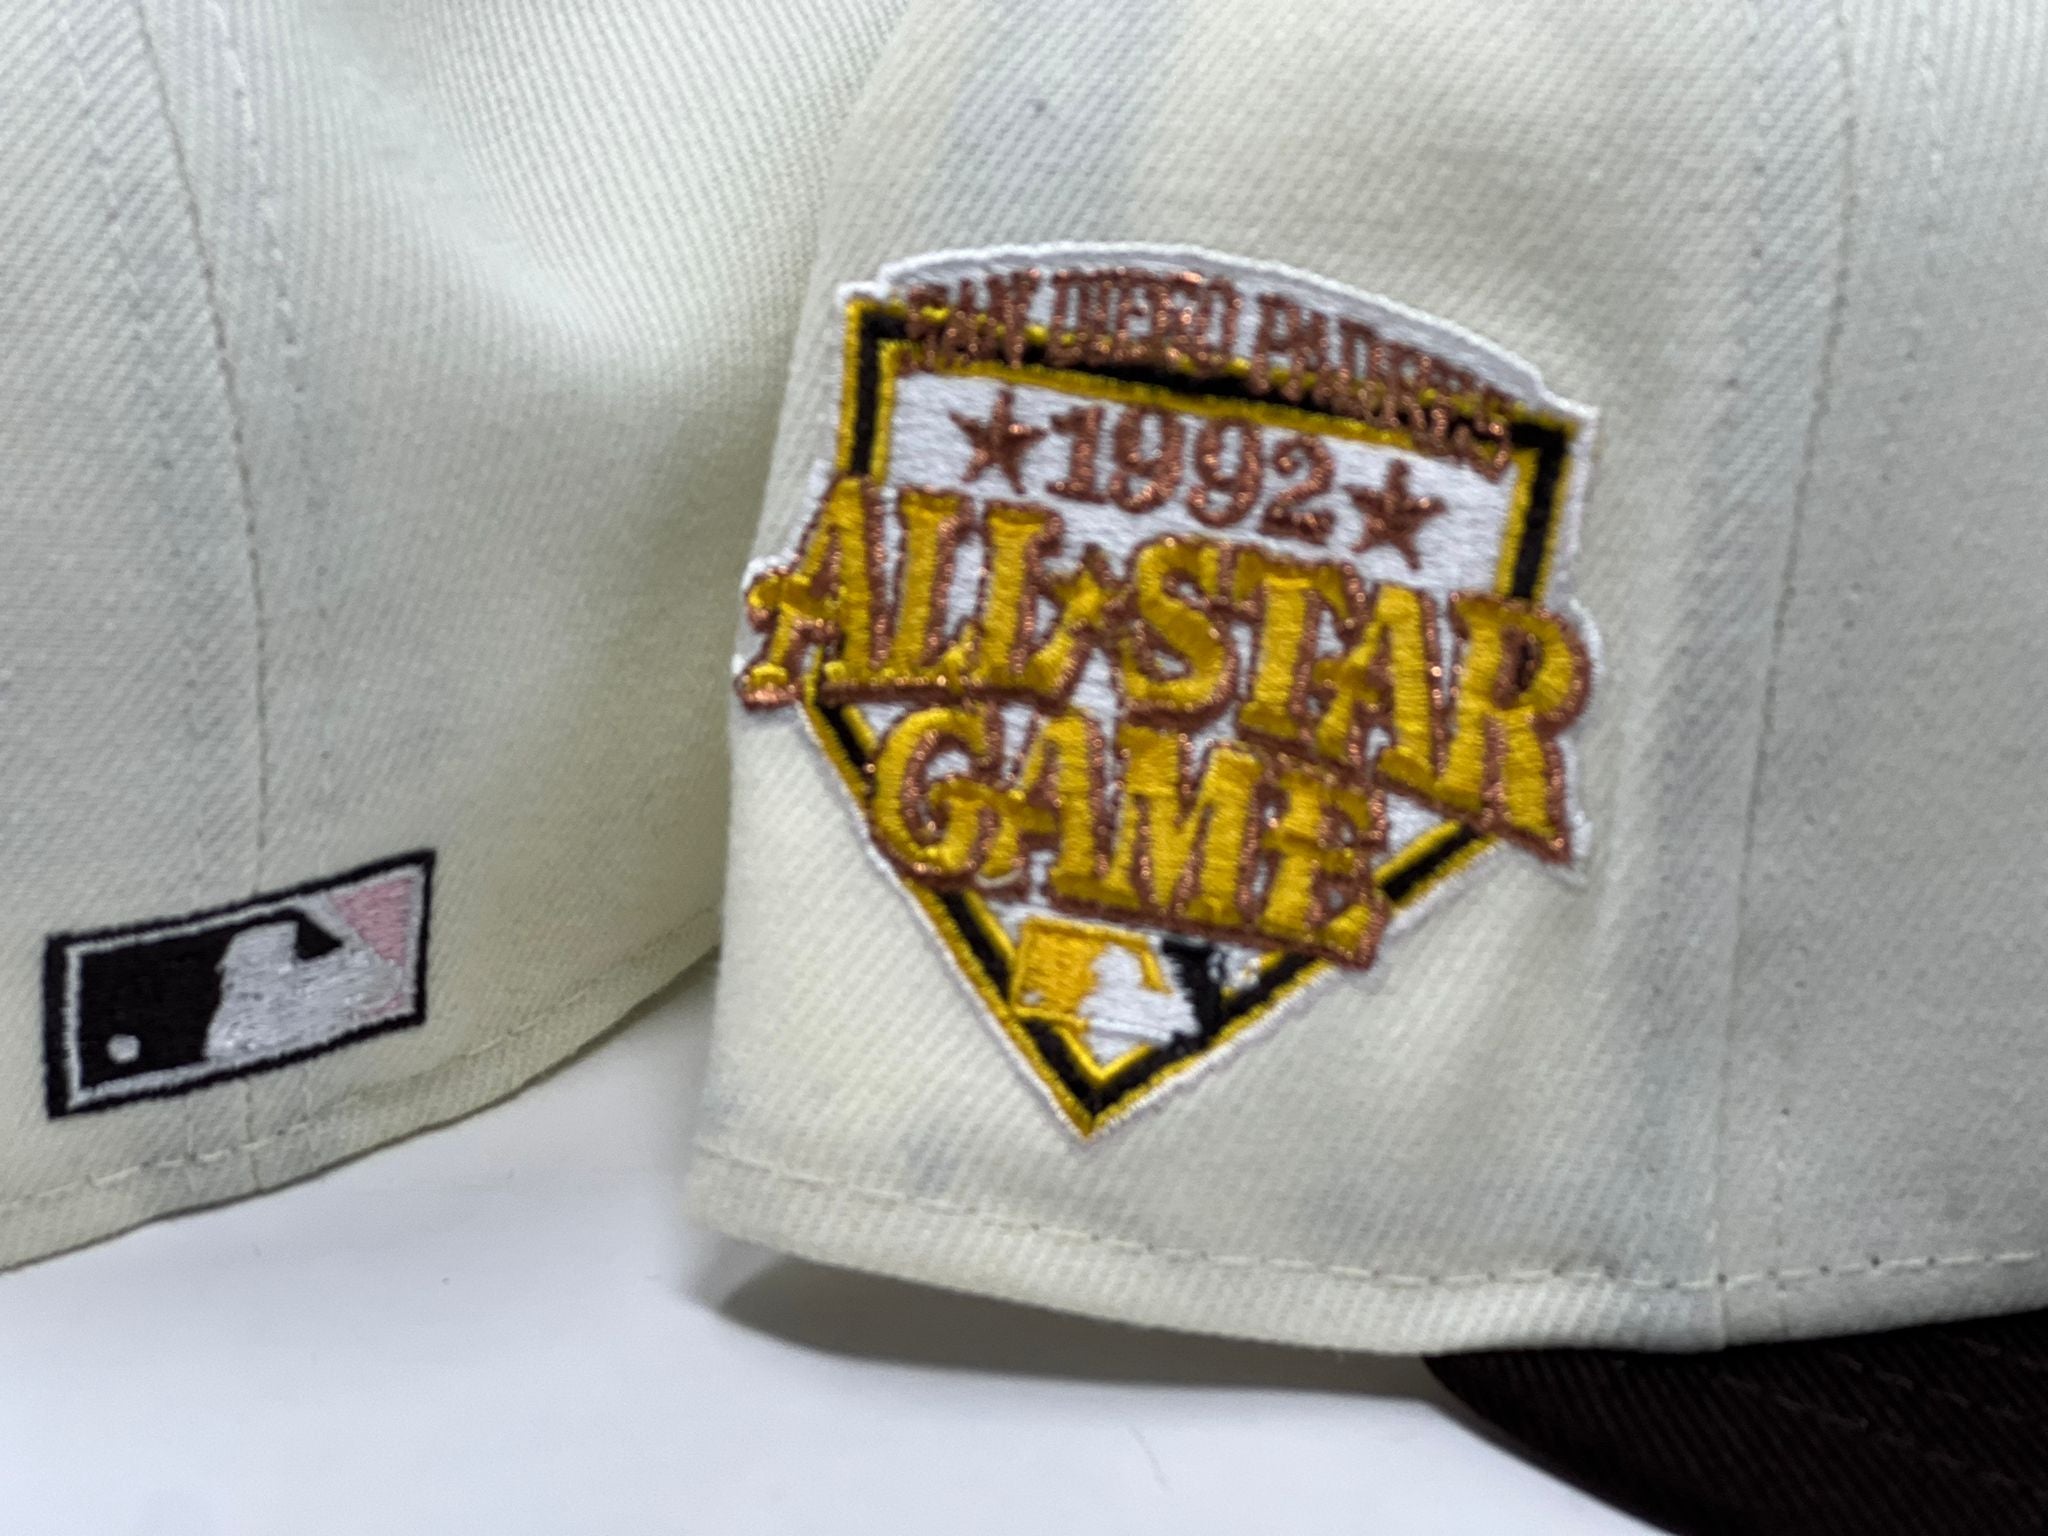 Sky Blue San Diego Padres Pink Bottom 1992 All Star Game Side Patch New Era 59FIFTY Fitted 71/2